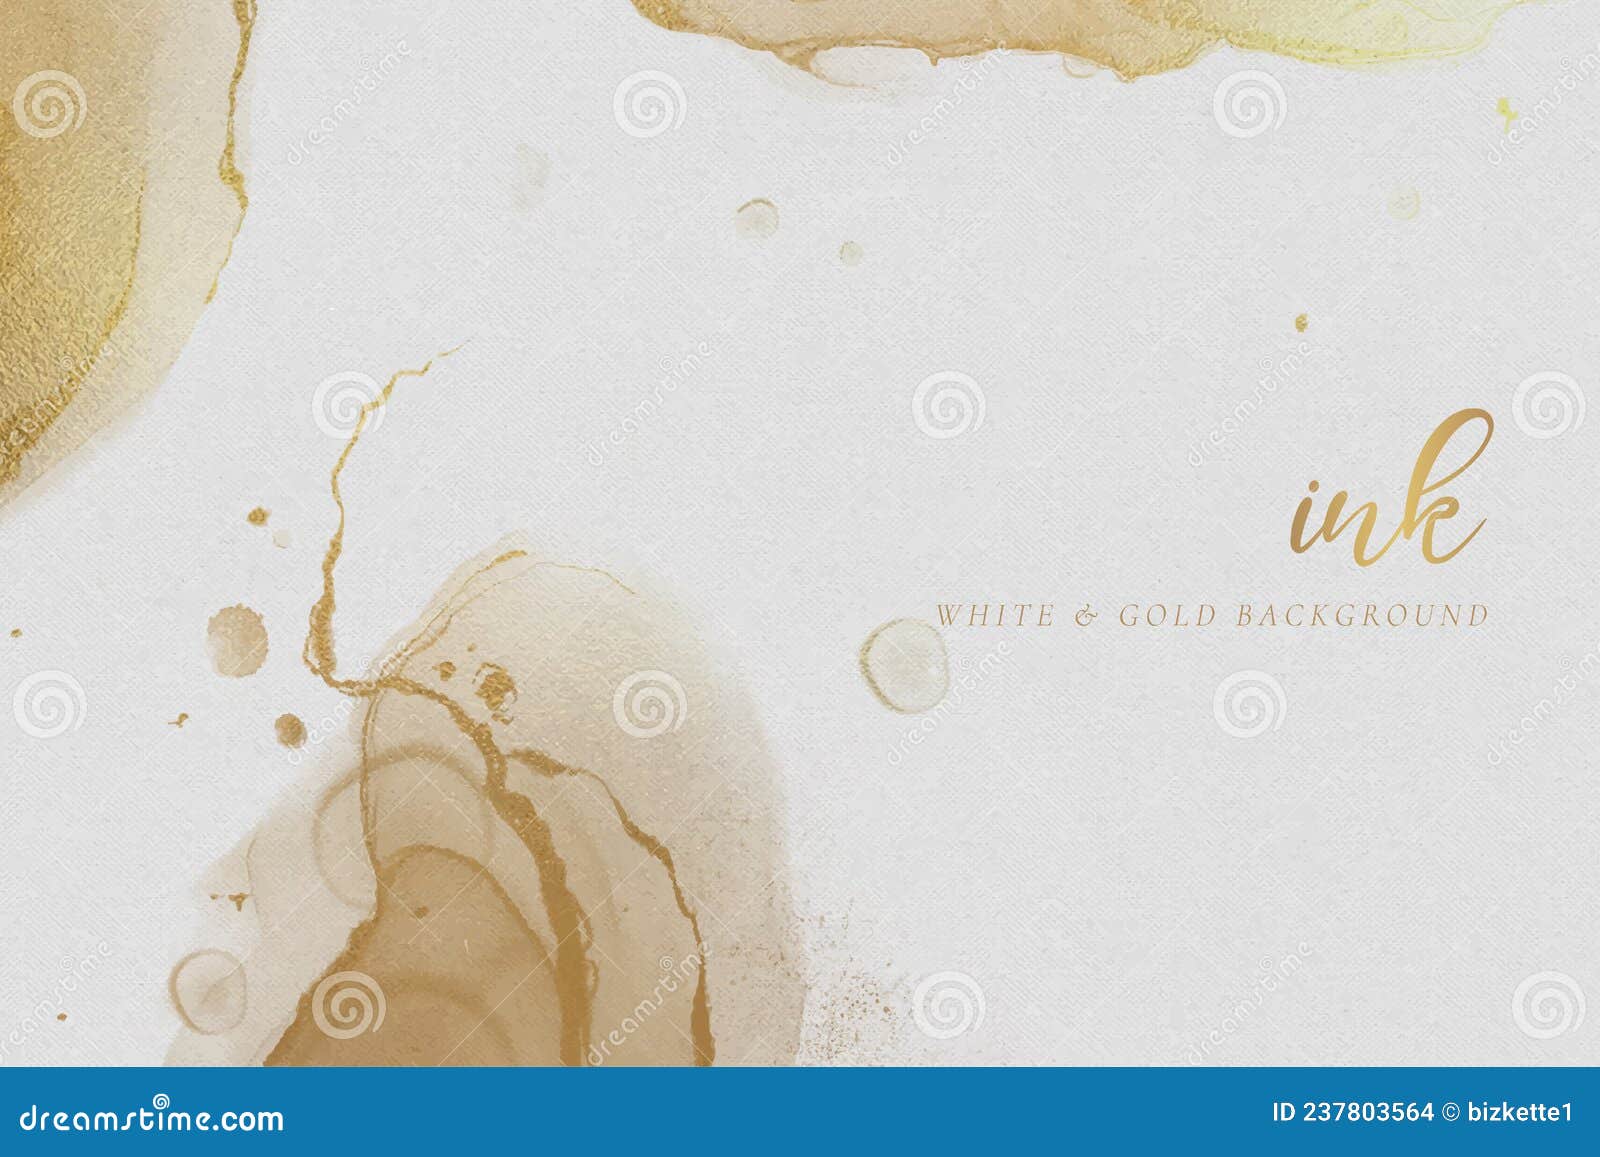 White Gold Alcohol Ink Background Vector Illustration Stock Vector ...